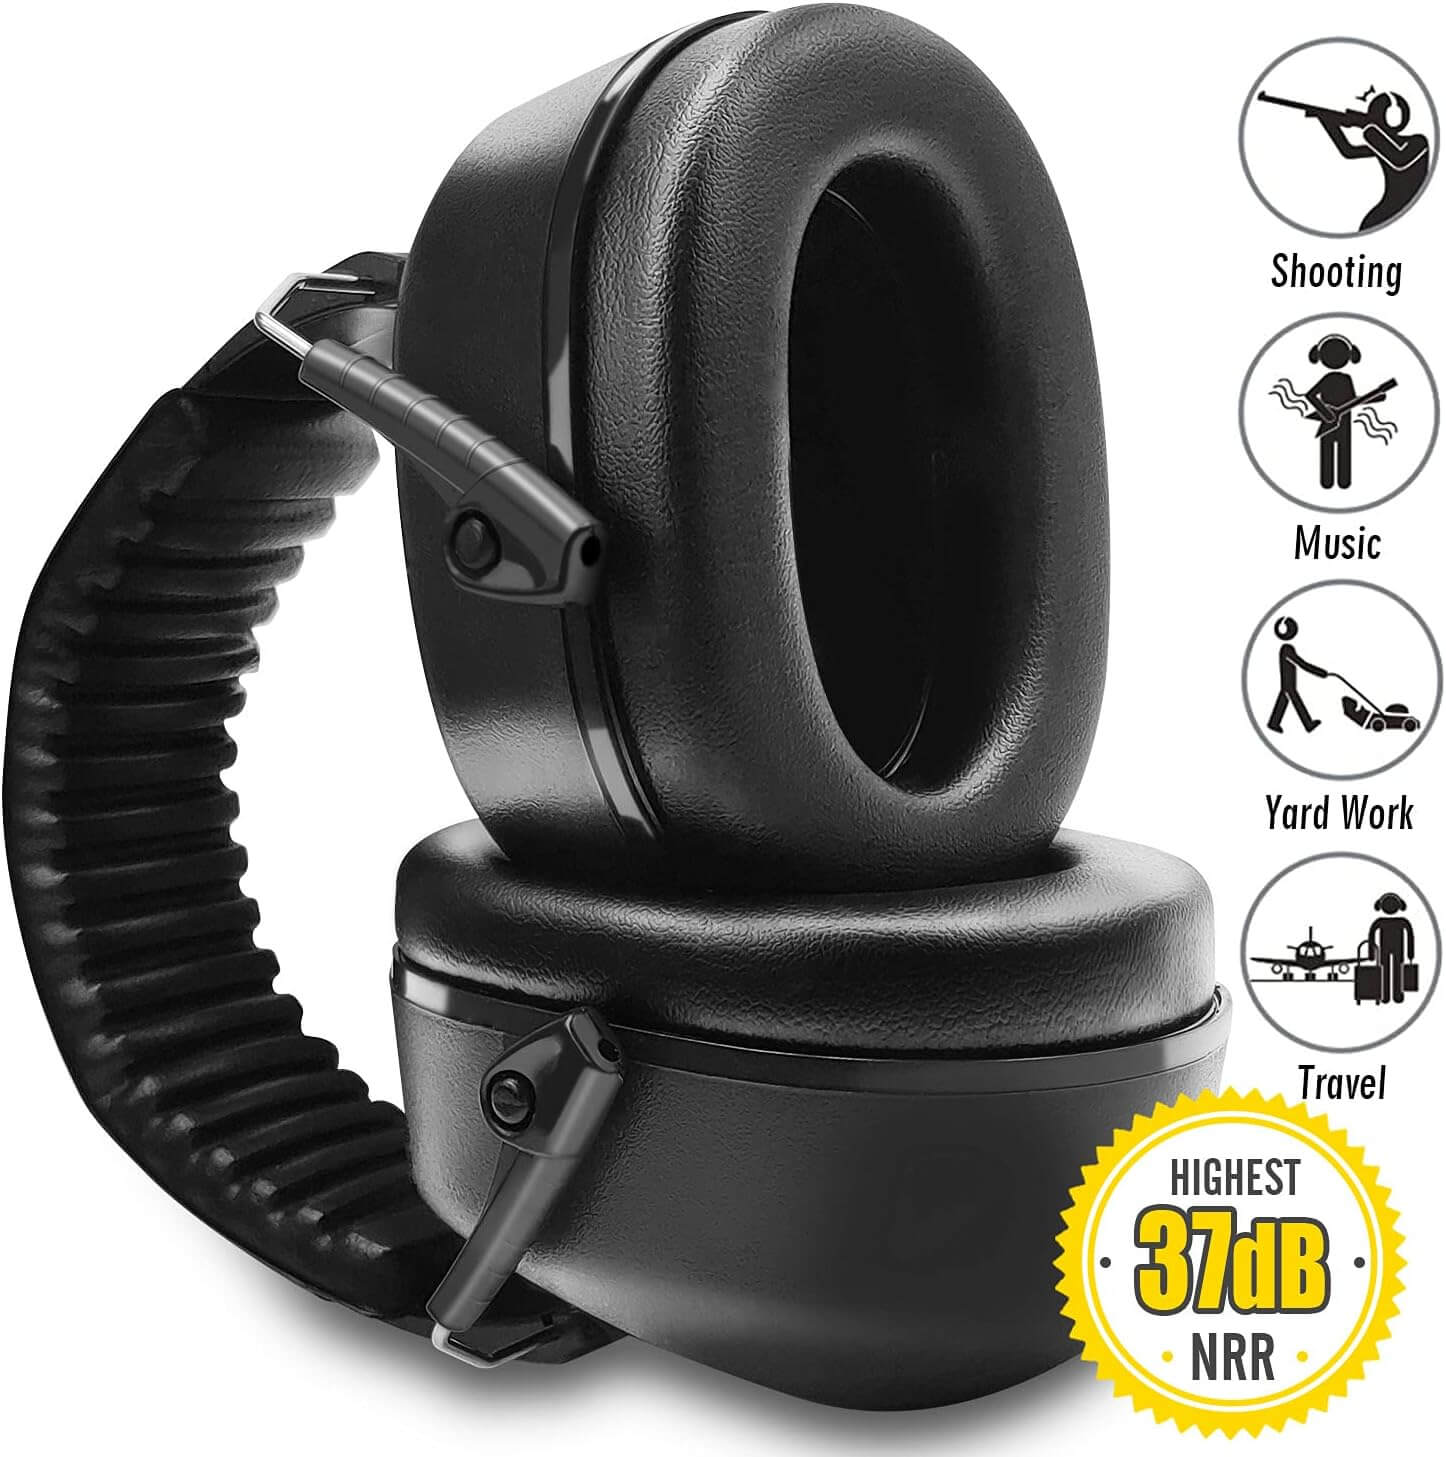 FRiEQ 37 dB NRR Sound Technology Safety Ear Muffs with LRPu Foam for Shooting, Music & Yard Work - 360° rotatable ear cups